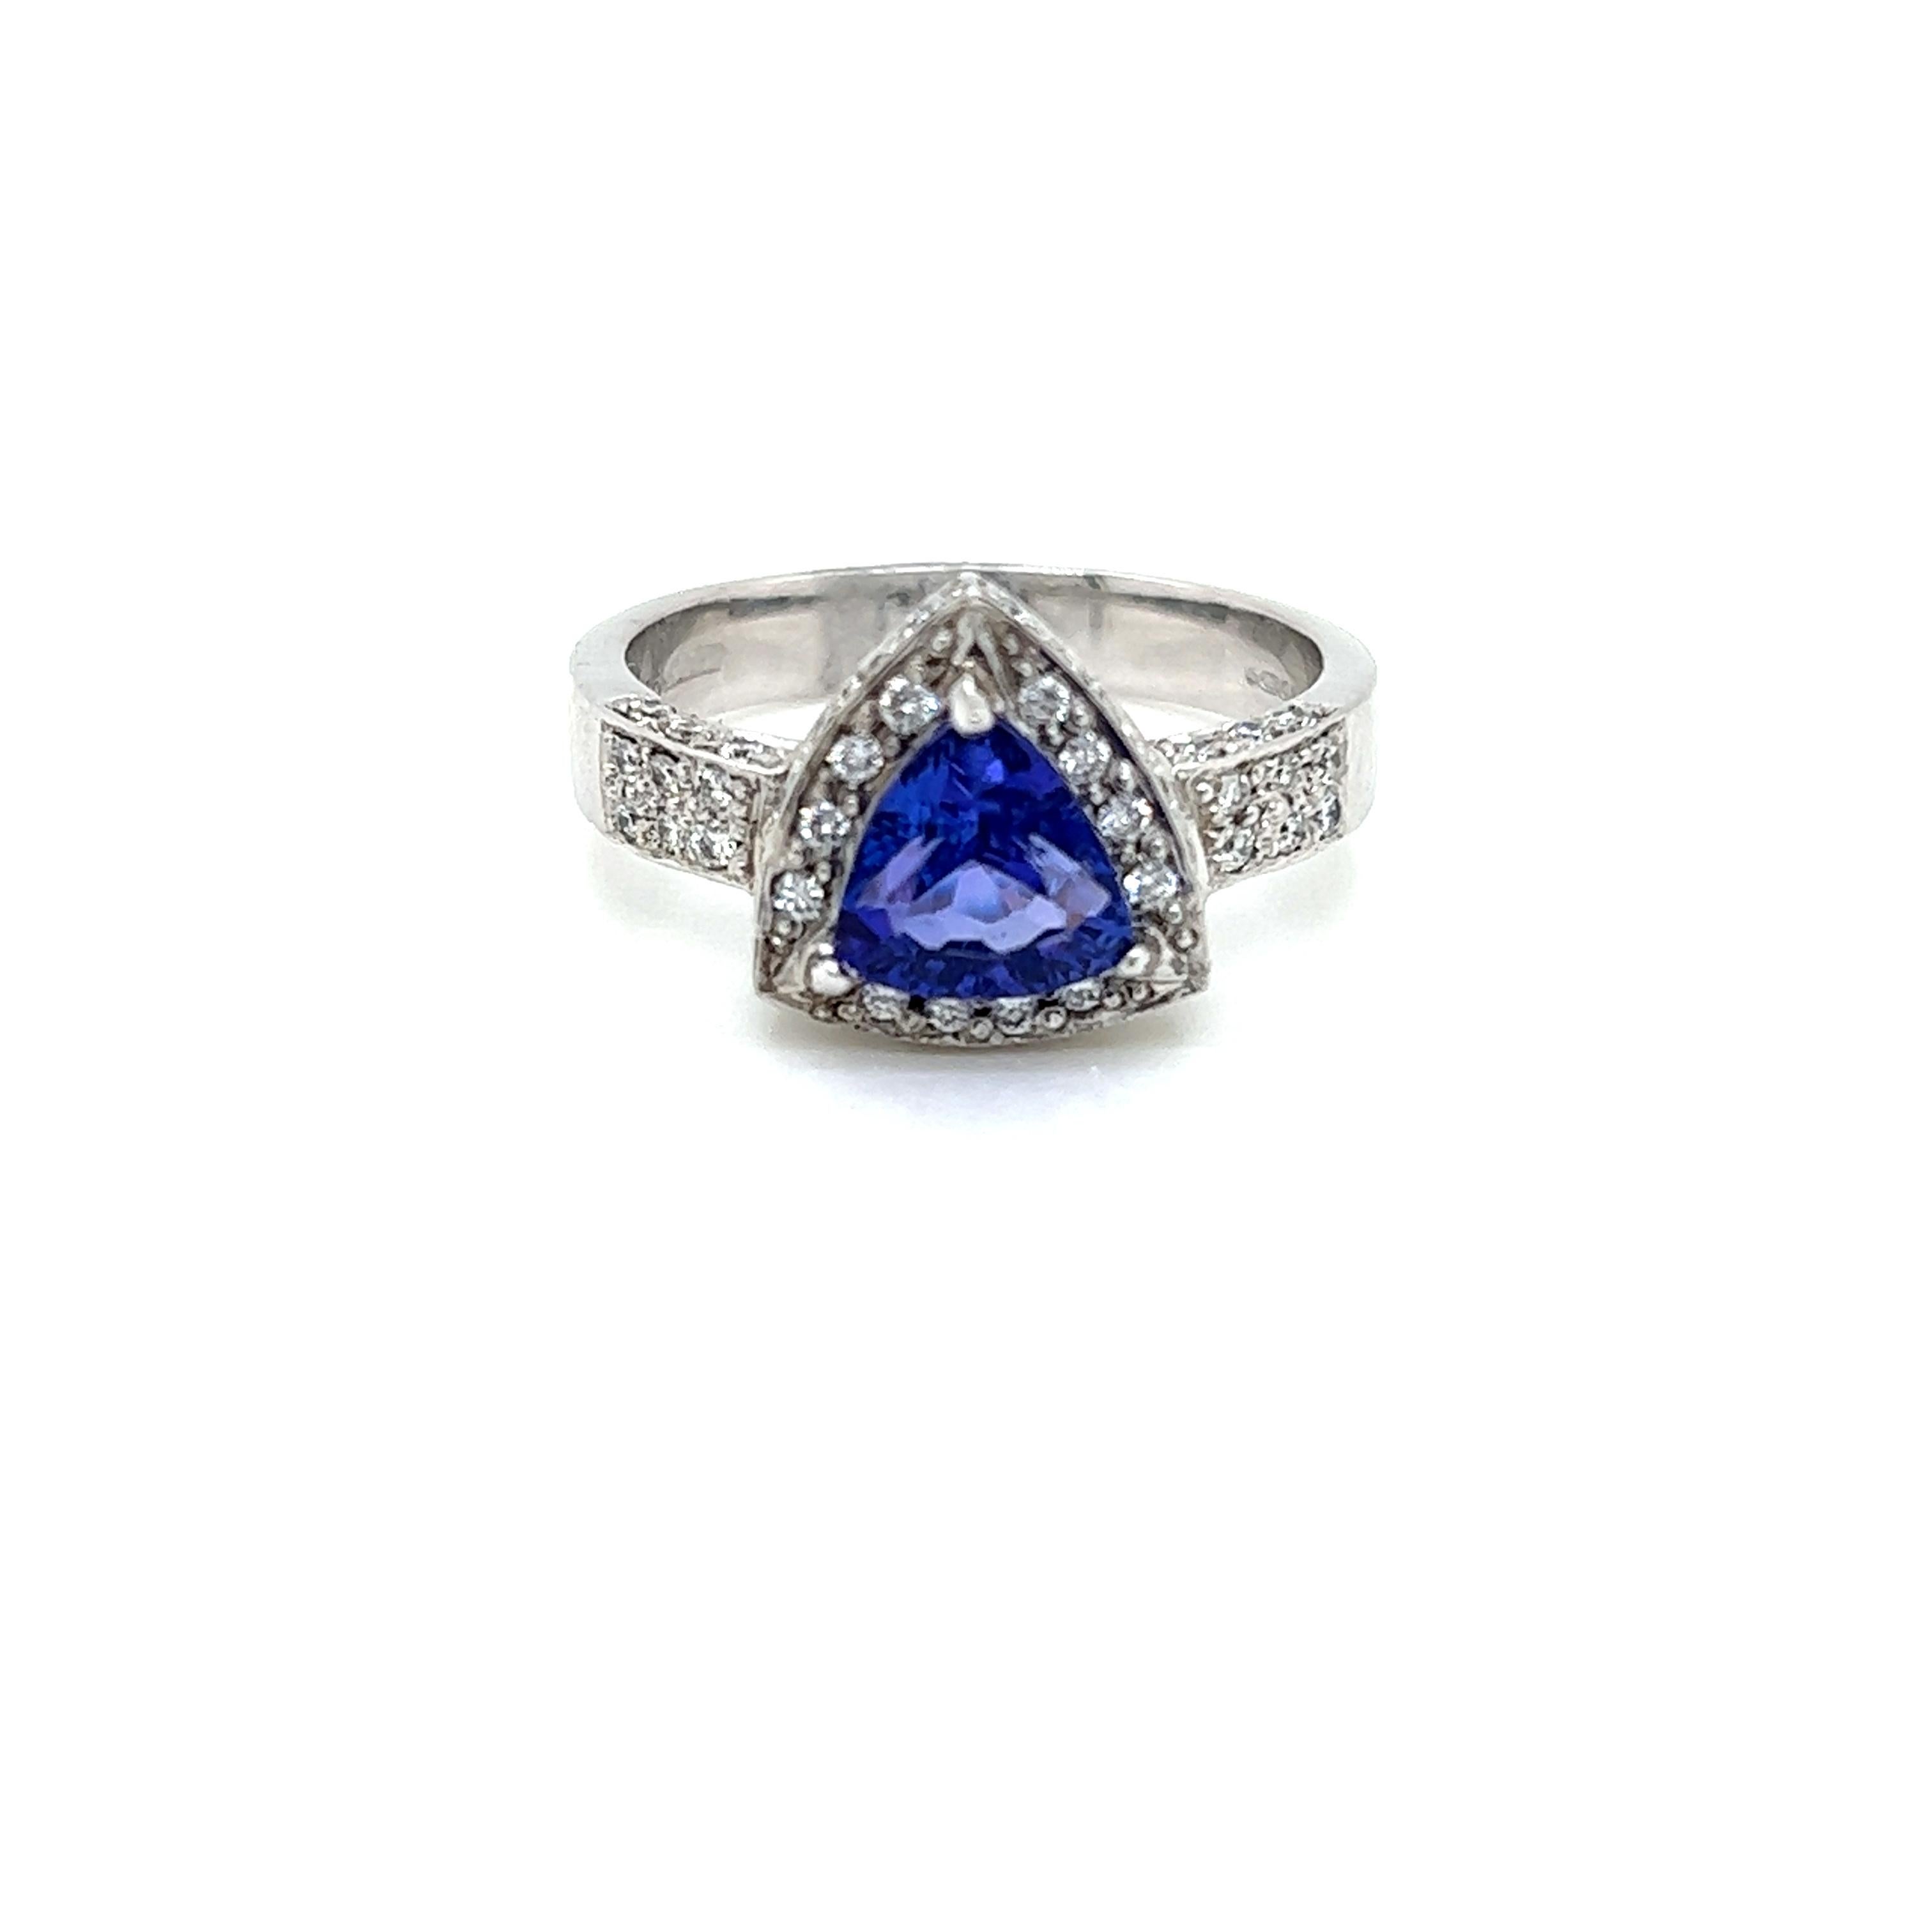 This striking ring features a stunning 2.1 carat Trillion cut Tanzanite at its centre. The lustrous, rich hues of this alluring stone are framed by glittering Diamonds and set on a diamond-encrusted Platinum band.  

The Diamonds on this ring weigh